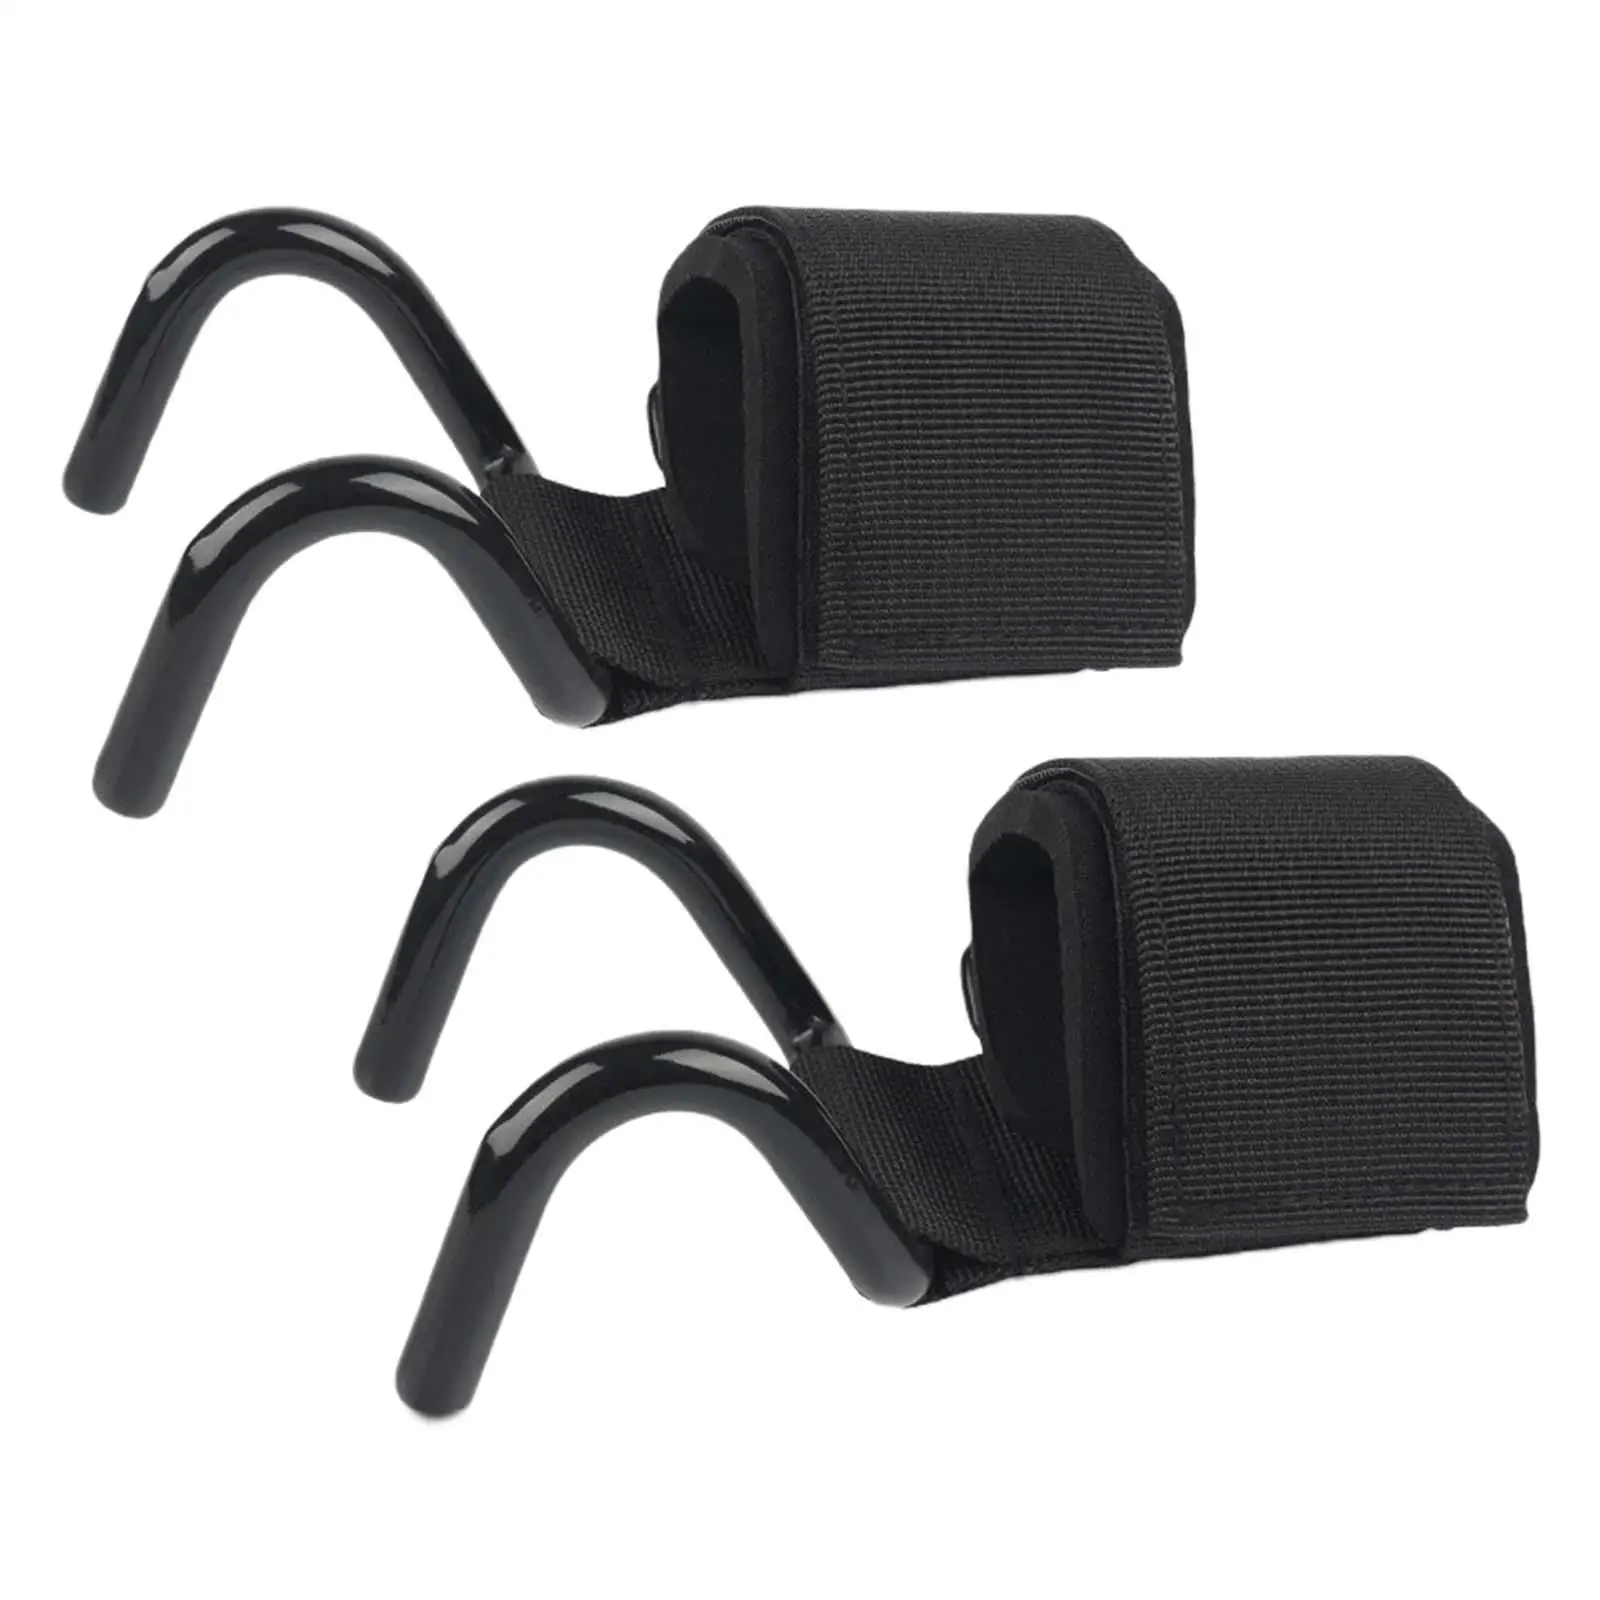 Weight Lifting Hooks Lifting Wrist Straps for Weightlifting Exercise Workout